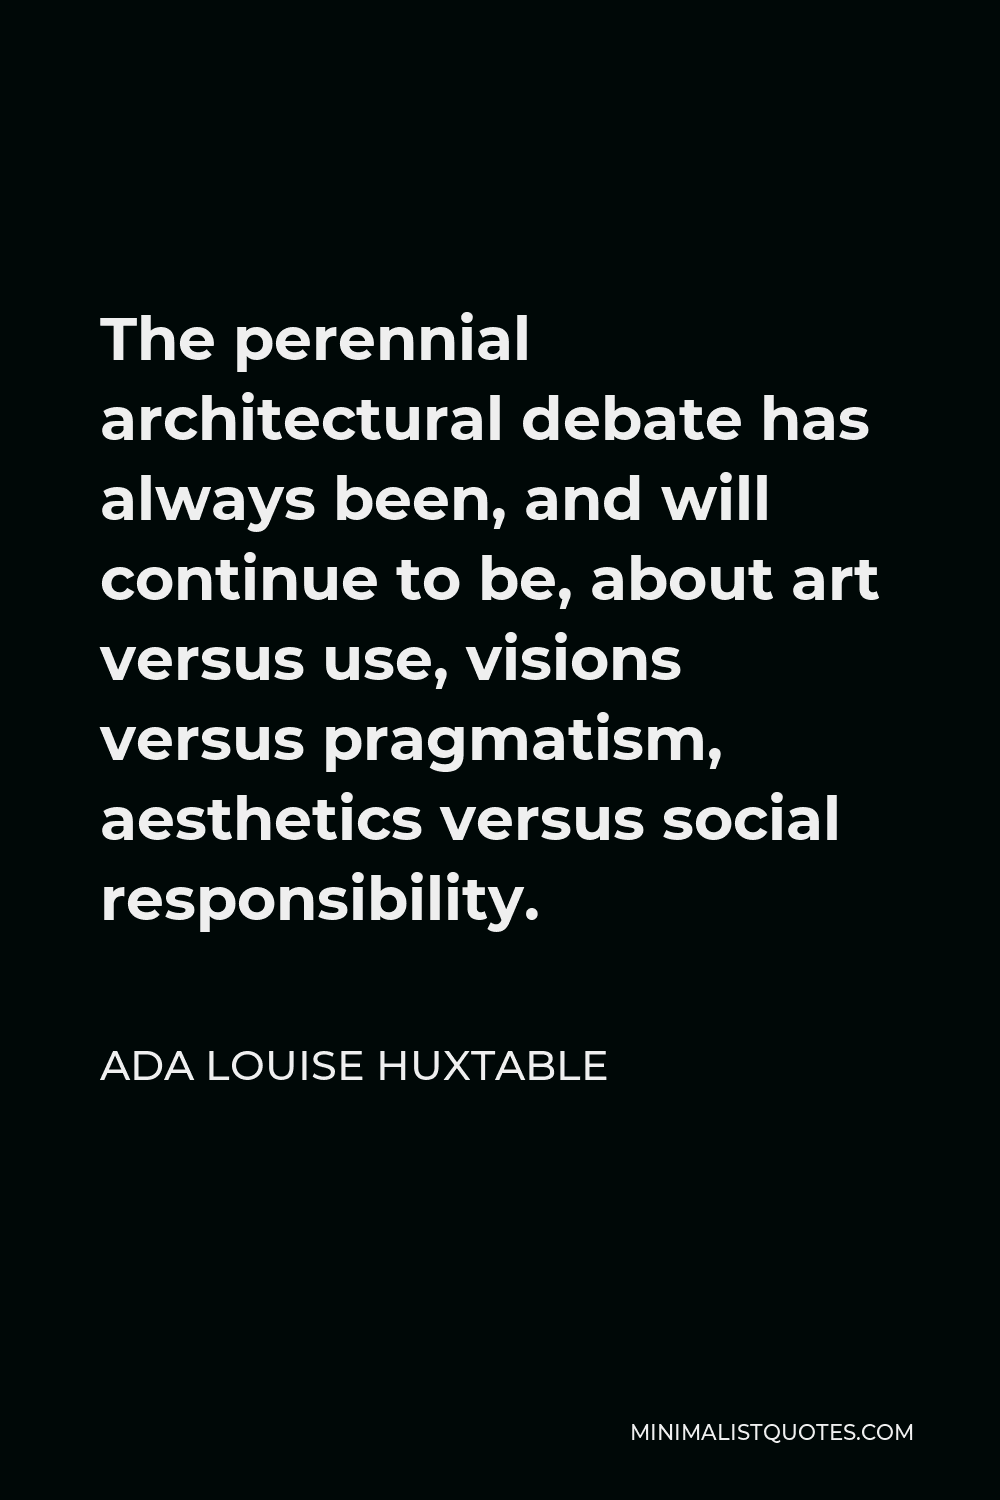 Ada Louise Huxtable Quote - The perennial architectural debate has always been, and will continue to be, about art versus use, visions versus pragmatism, aesthetics versus social responsibility.